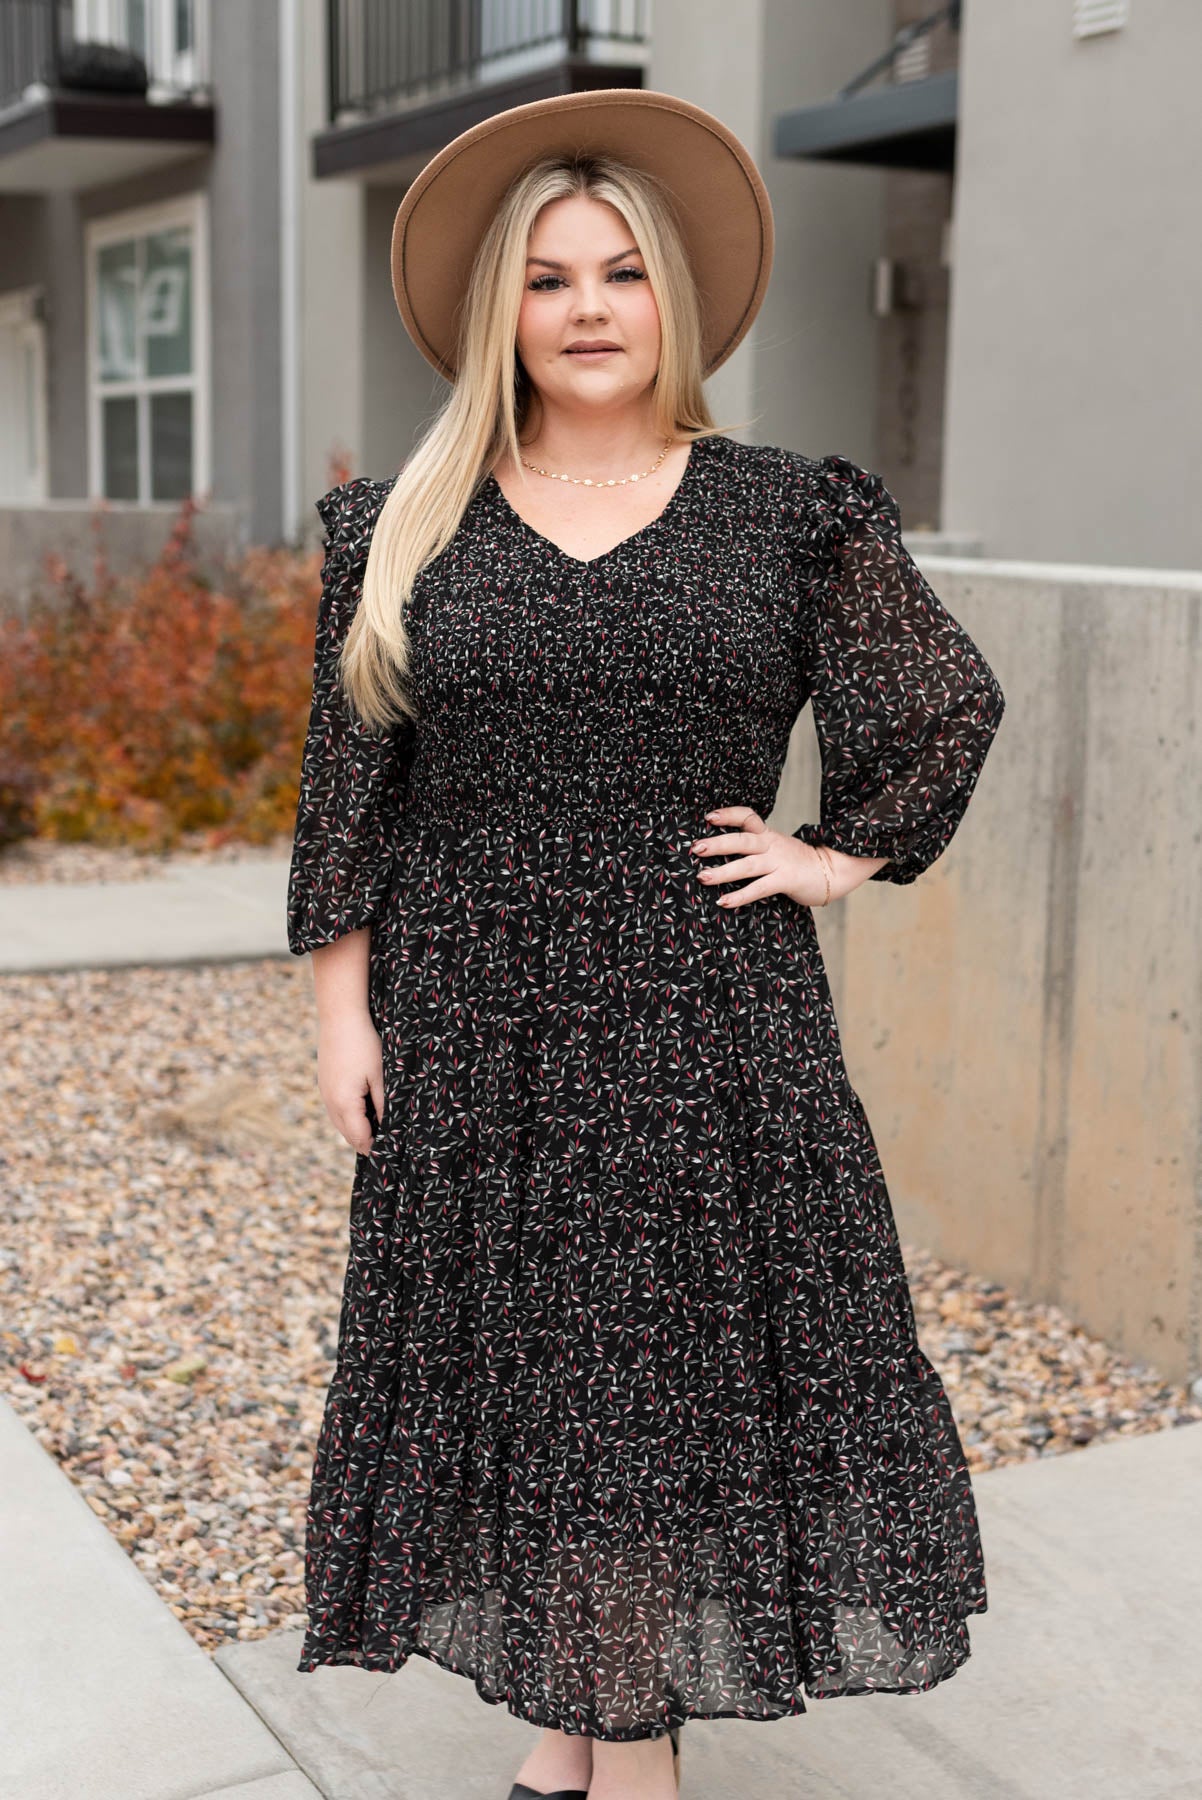 Plus size black floral dress with smocked bodice and tiered skirt